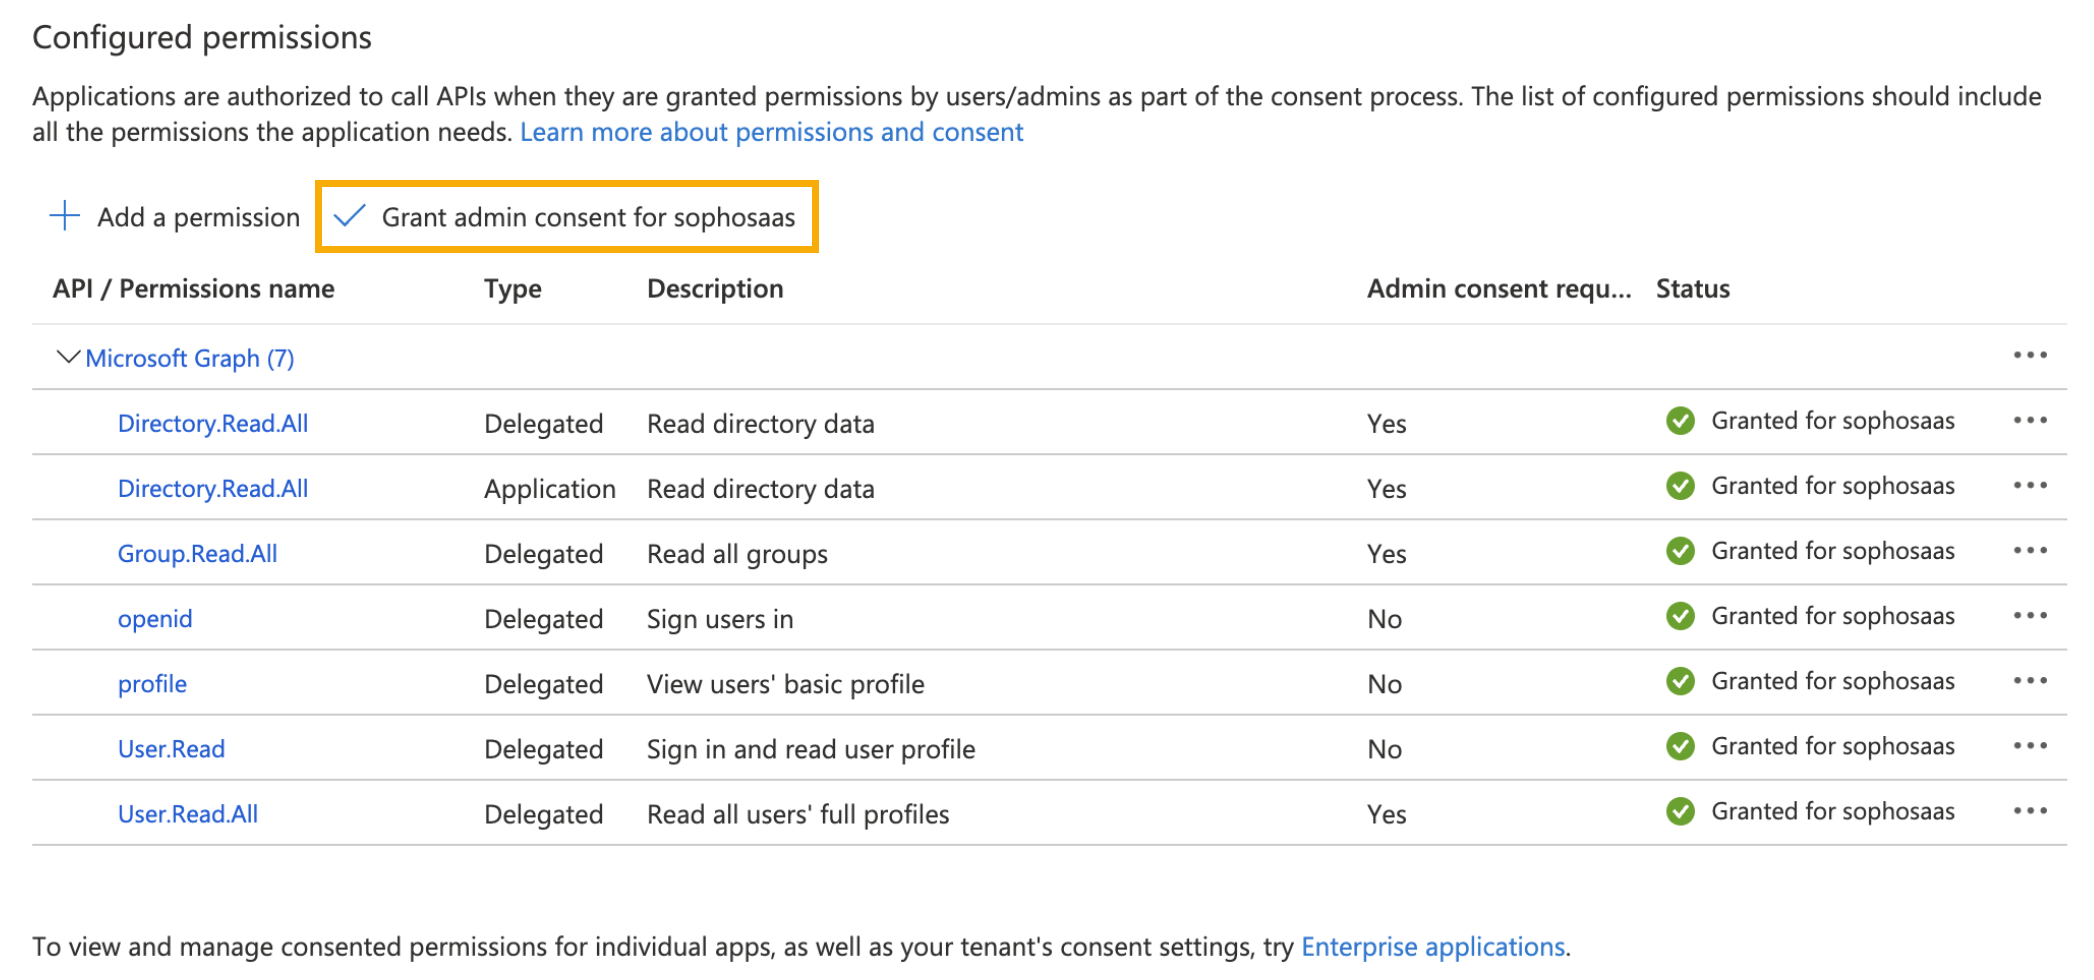 Completed API permissions